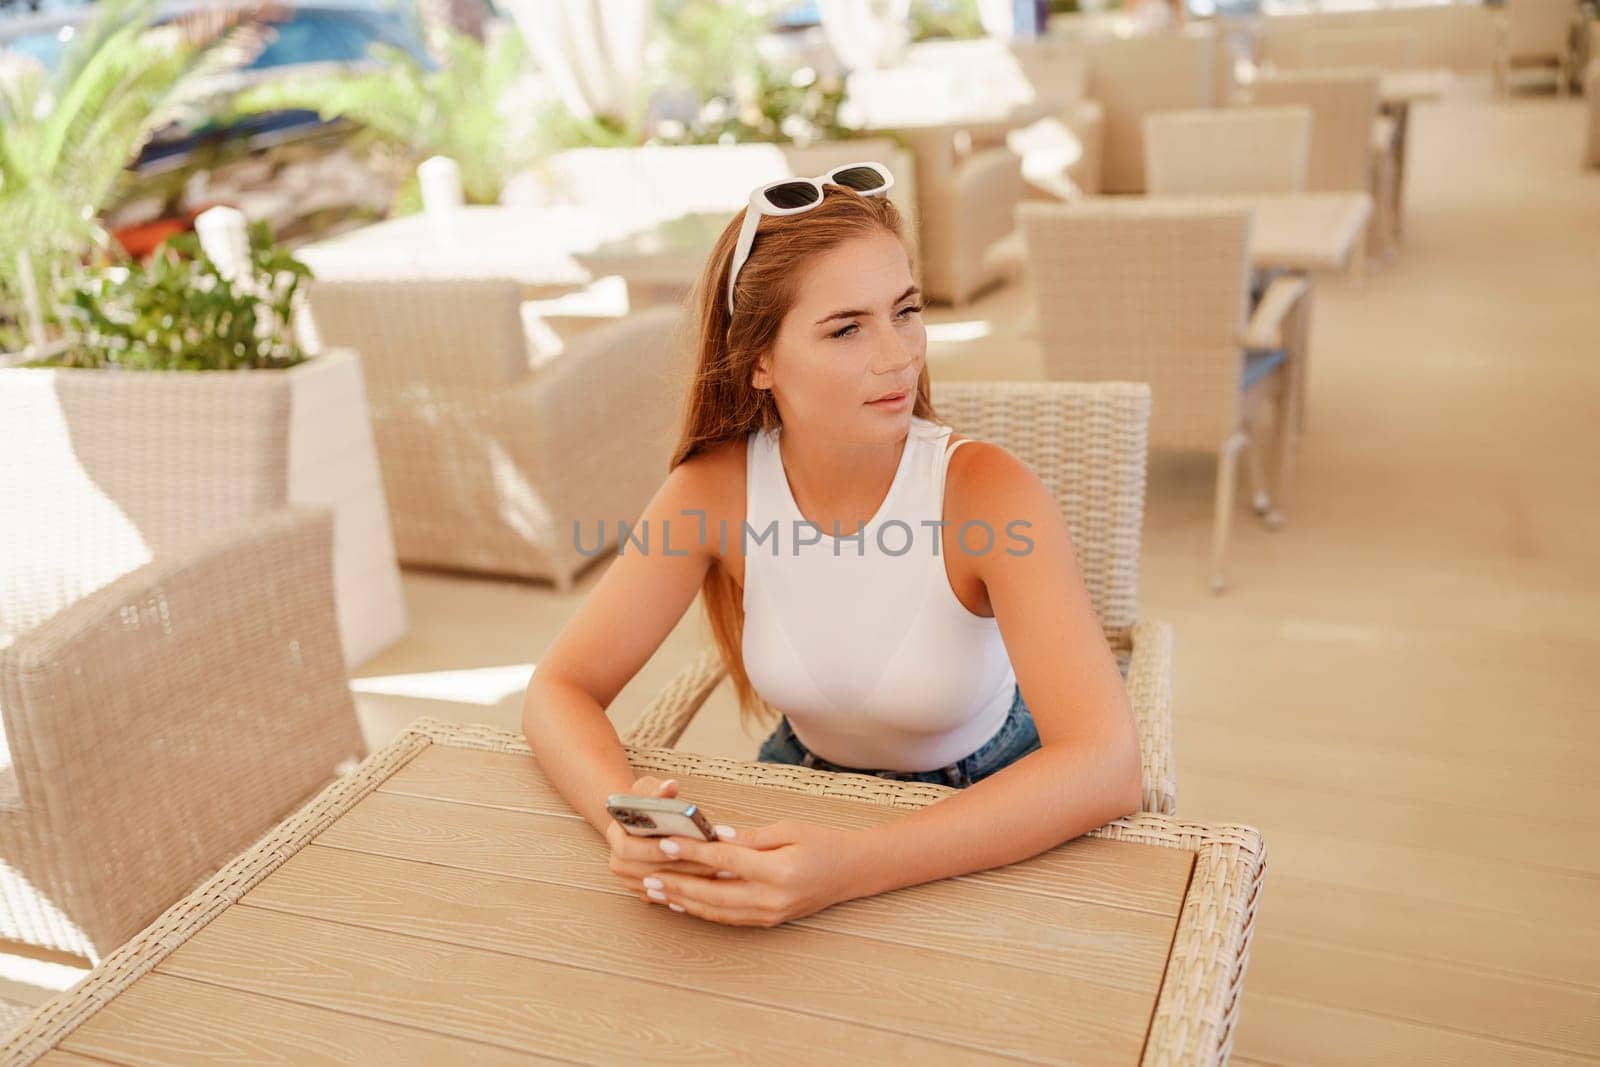 Woman sits in outdoor cafe at wooden table, holds smartphone. Bright sunny day provides natural lighting. Cafe offers relaxed atmosphere for customers to enjoy refreshments. by Matiunina